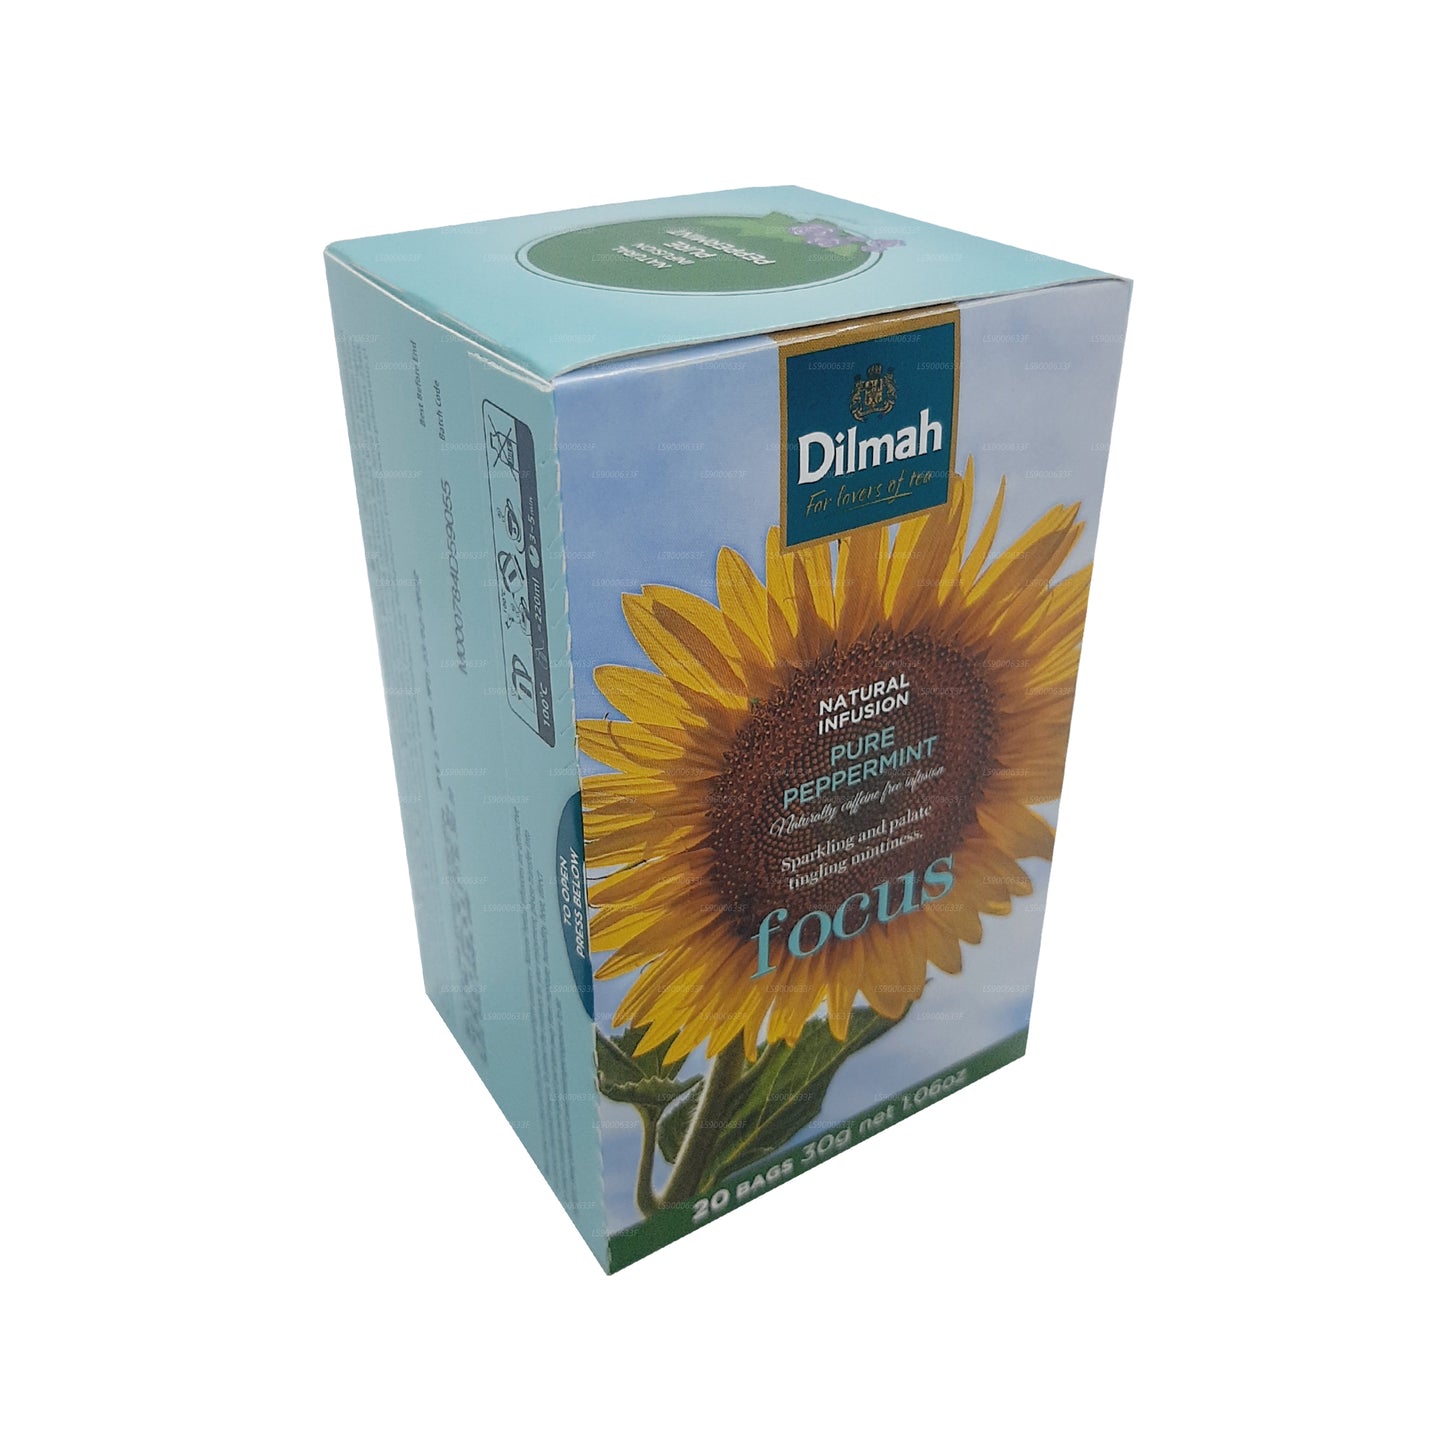 Dilmah Natural Infusion Pure Peppermint (30 g) 20 Teebeutel